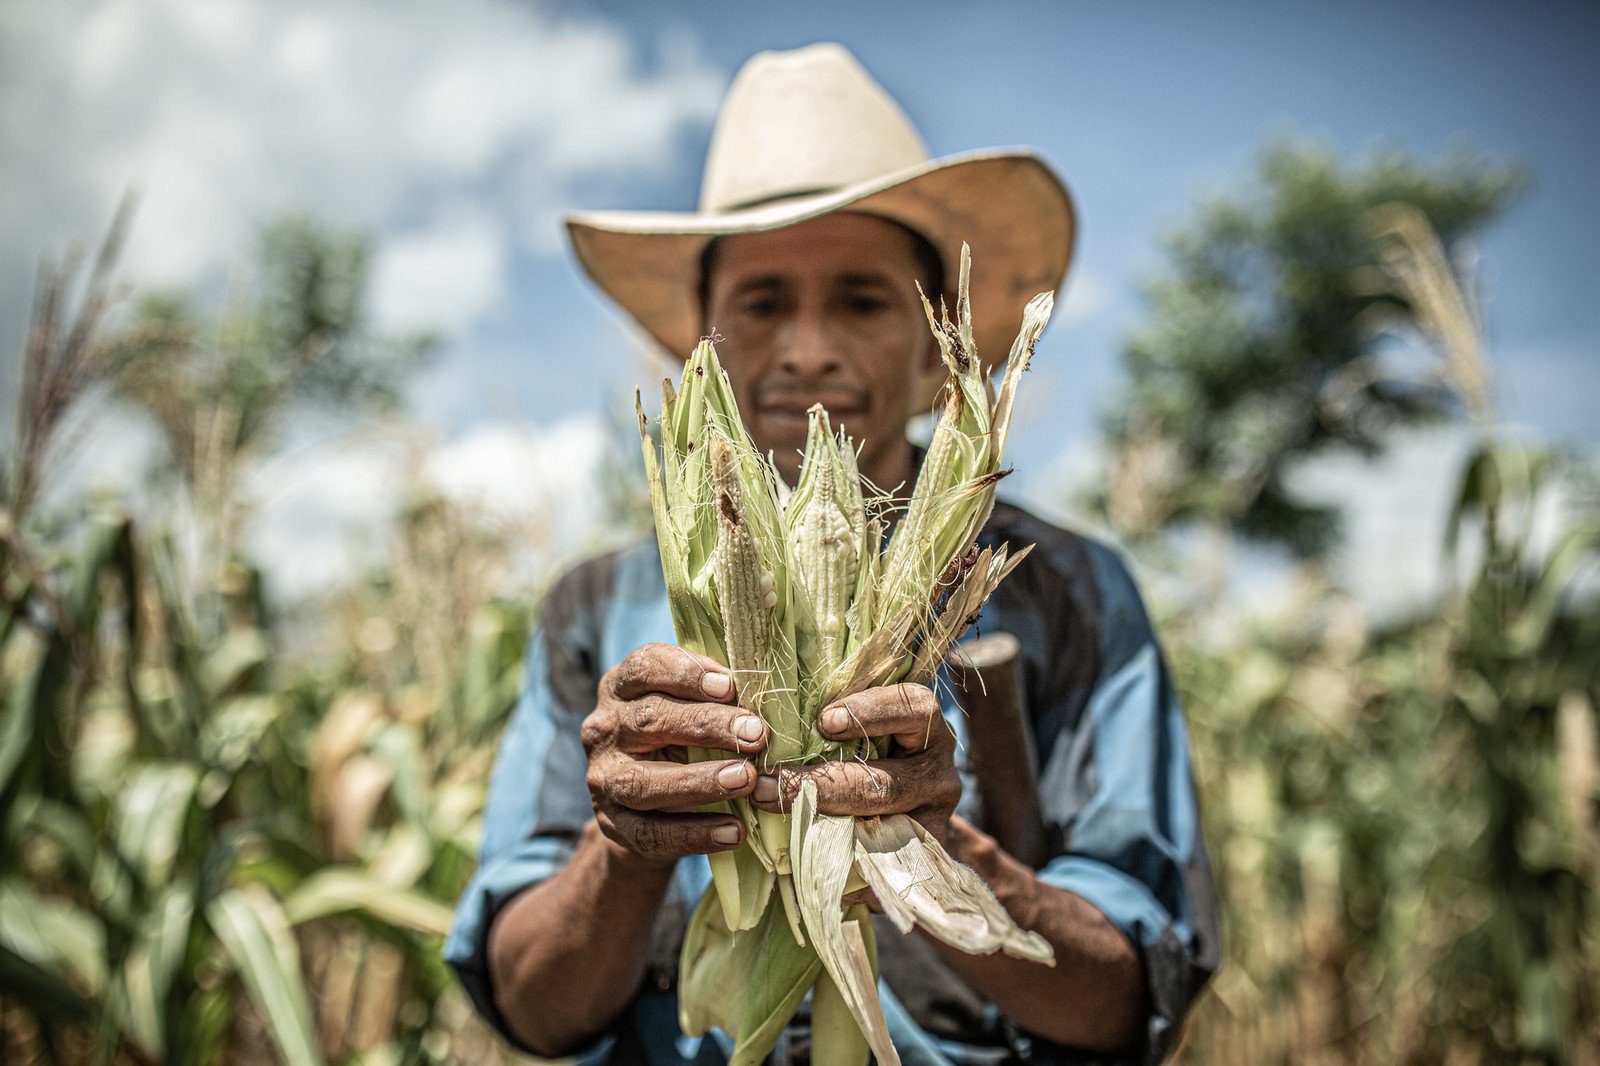 Oxfam has worked with partners to support over 20,000 people across the Dry Corridor in Central America, and plans to assist at least, another 10,000 people in 2020. (Photo: Pablo Tosco/Oxfam)  